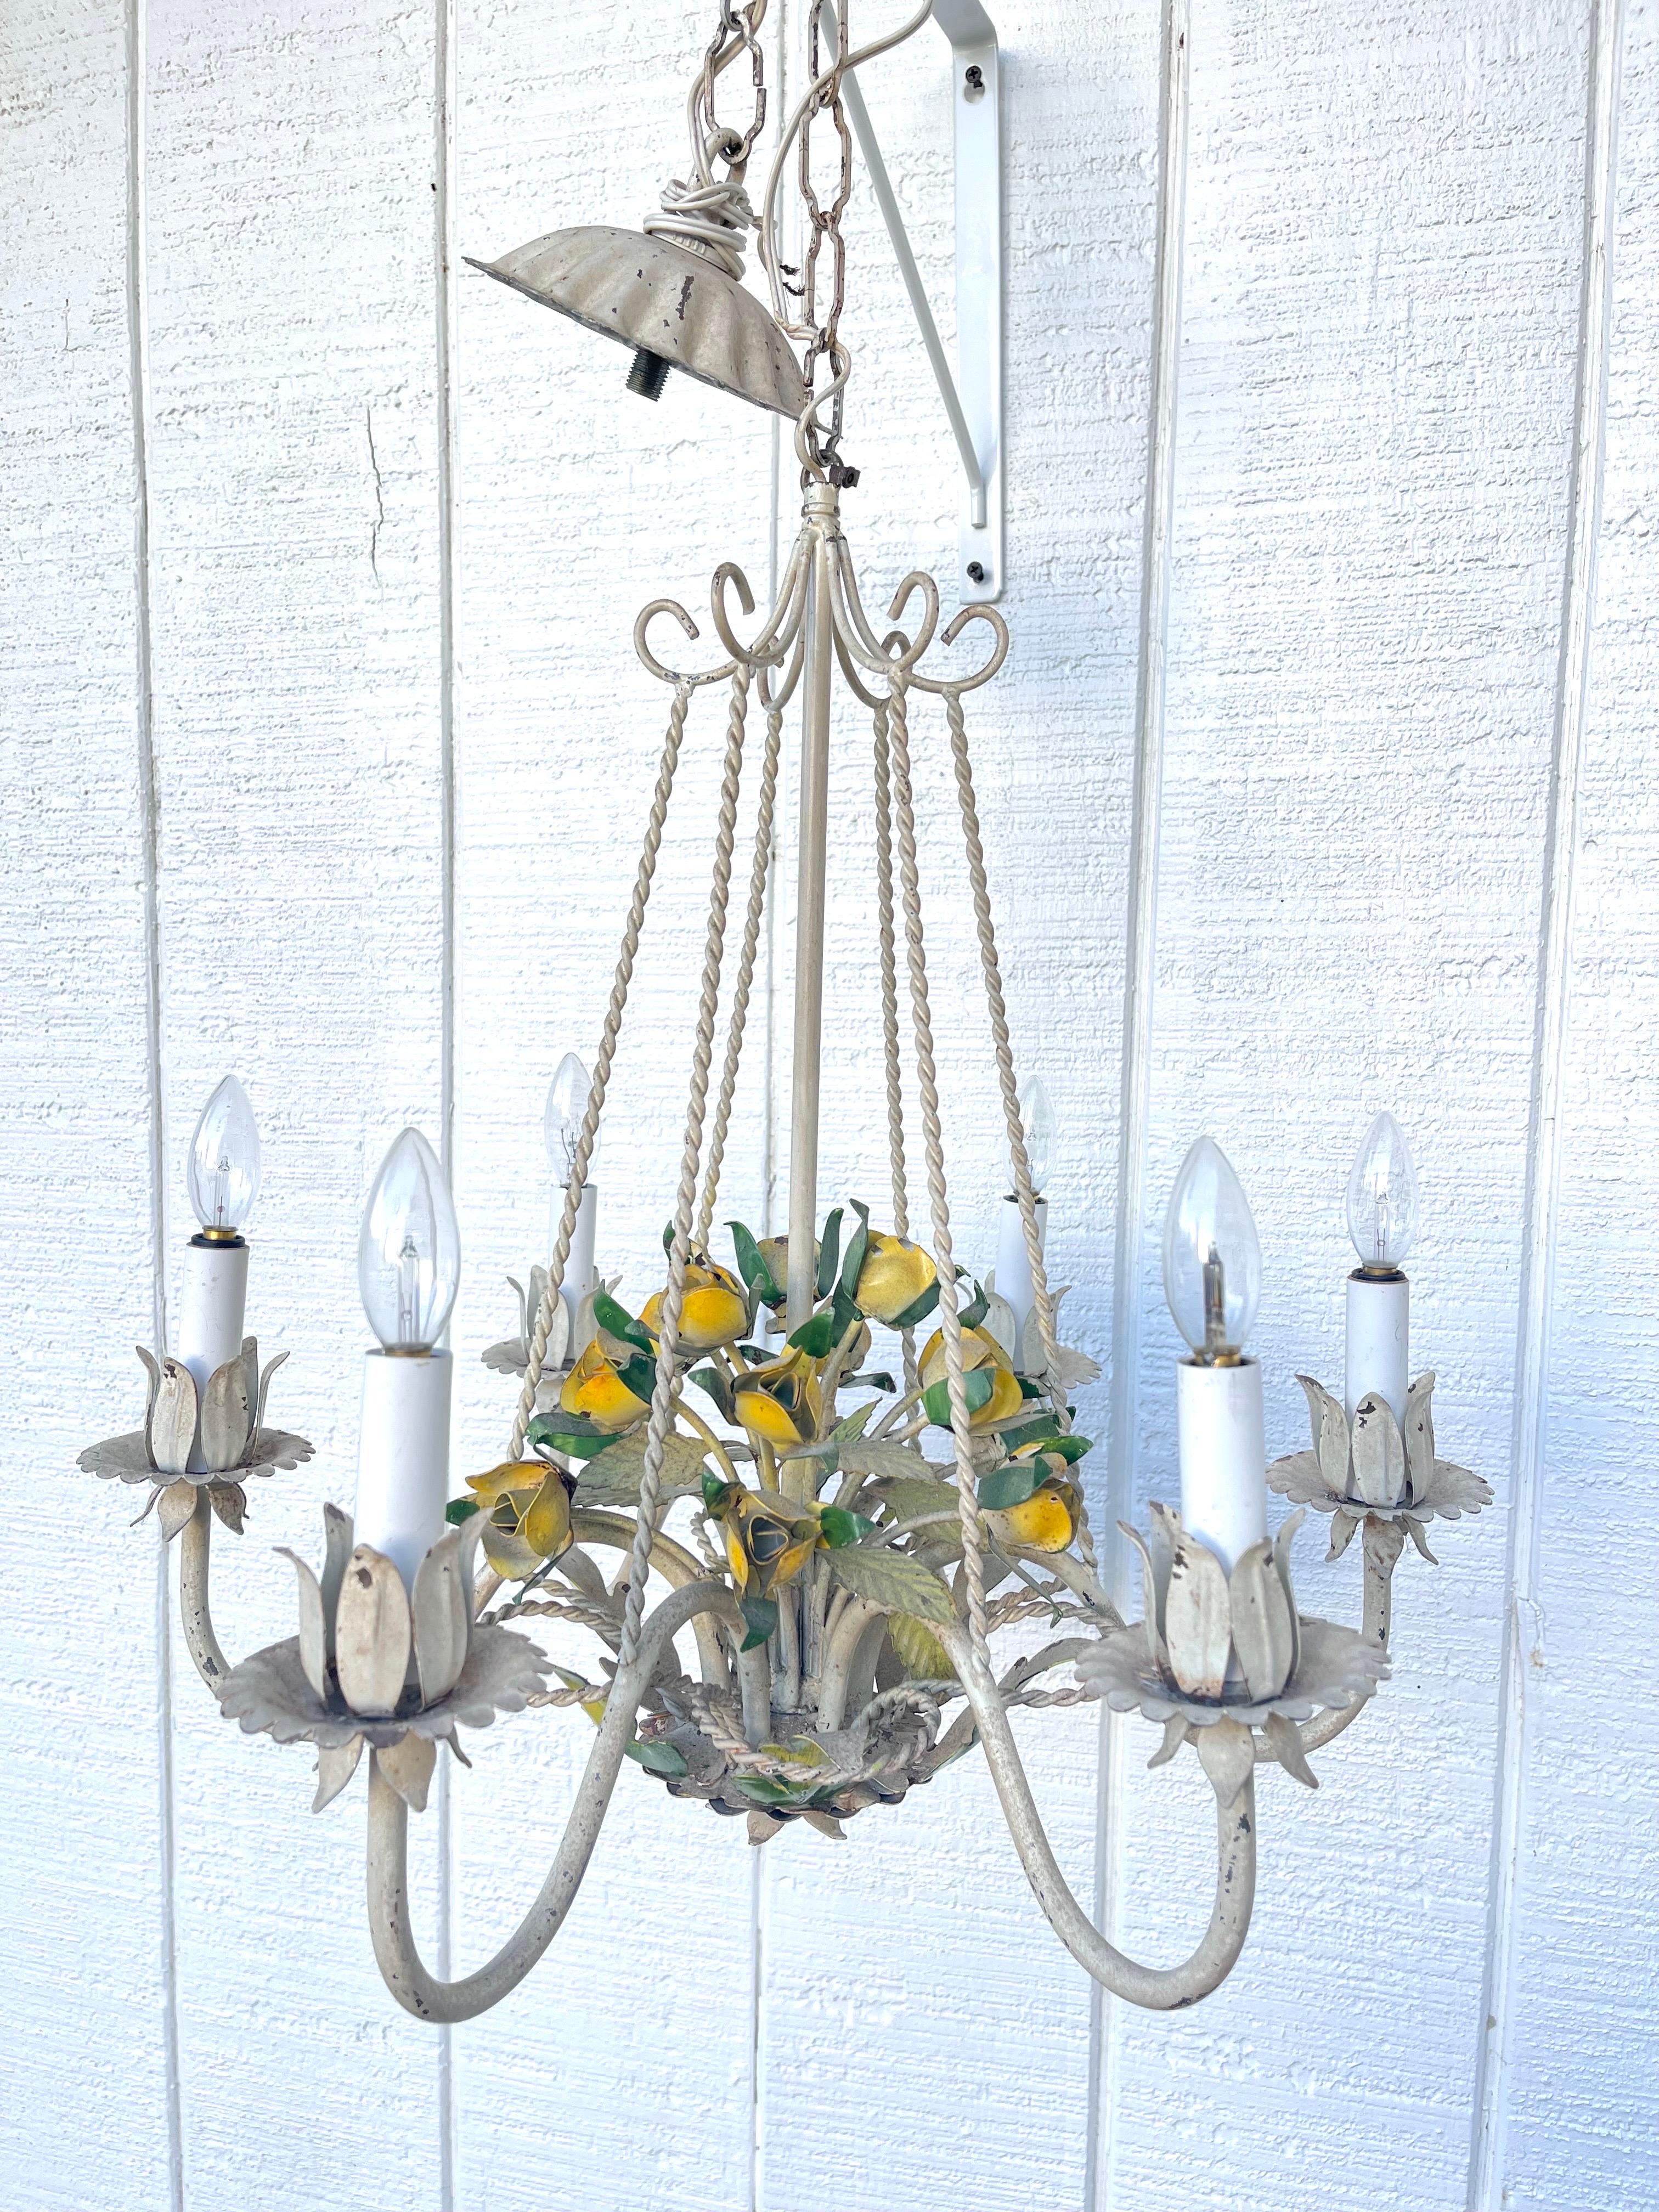 Italian Tole Floral Bouquet in Basket Chandelier. Gorgeous yellow flowers so happy and vibrant. Adorable custom Shades of Gingham green. Perfect to bring color and warmth to any room.
Measurement of chandelier chain is an additional 18.5